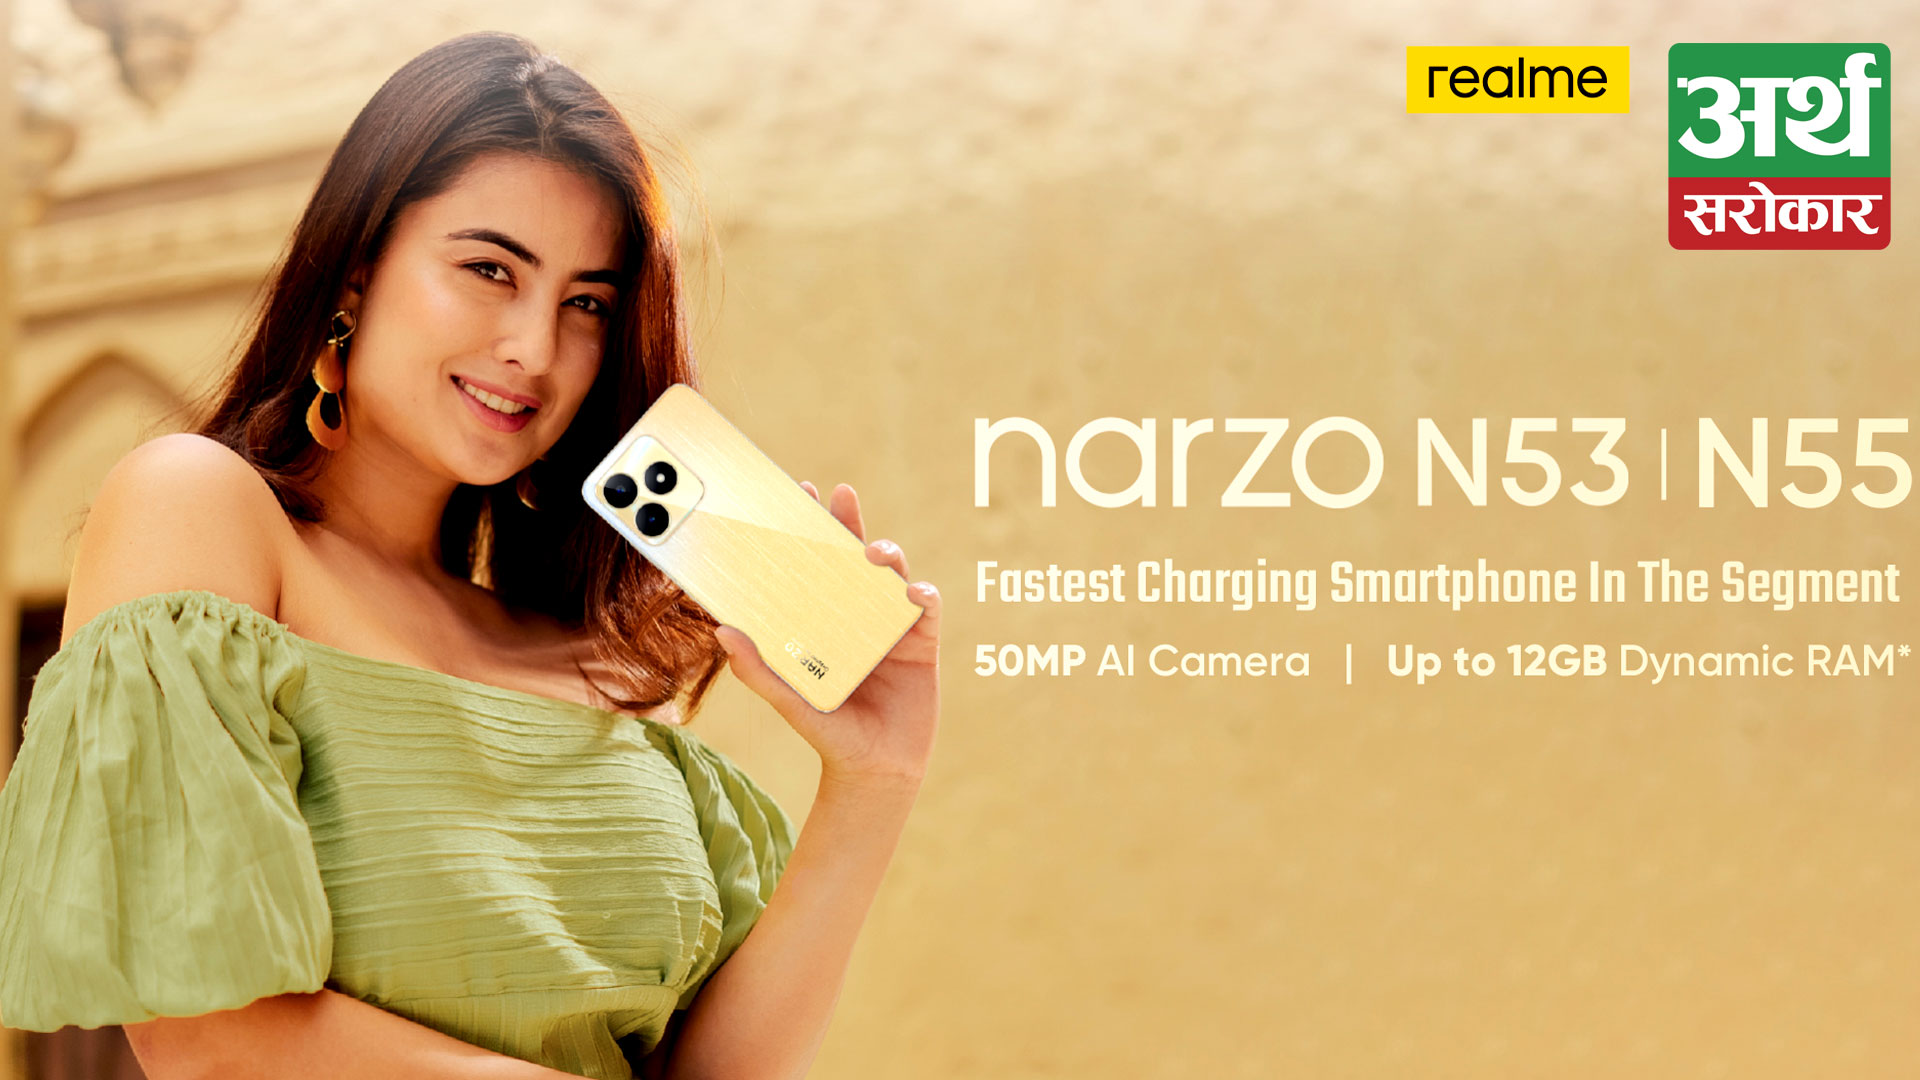 Unleash the Power of Individuality with the Spectacular realme narzo N55 & N53